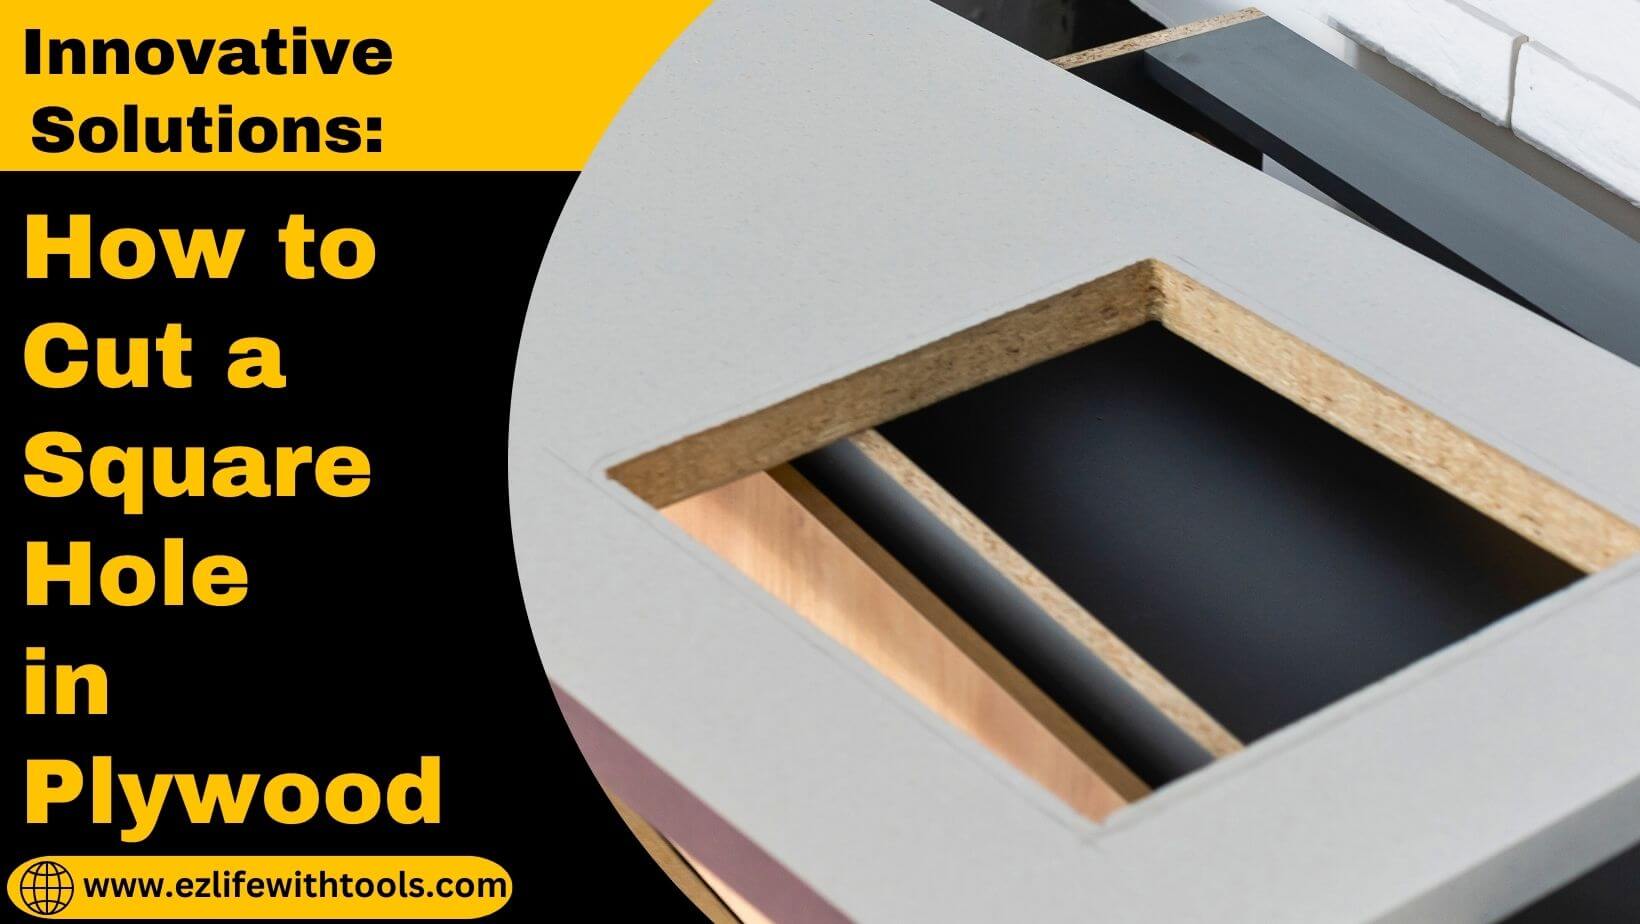 How to Cut a Square Hole in Plywood